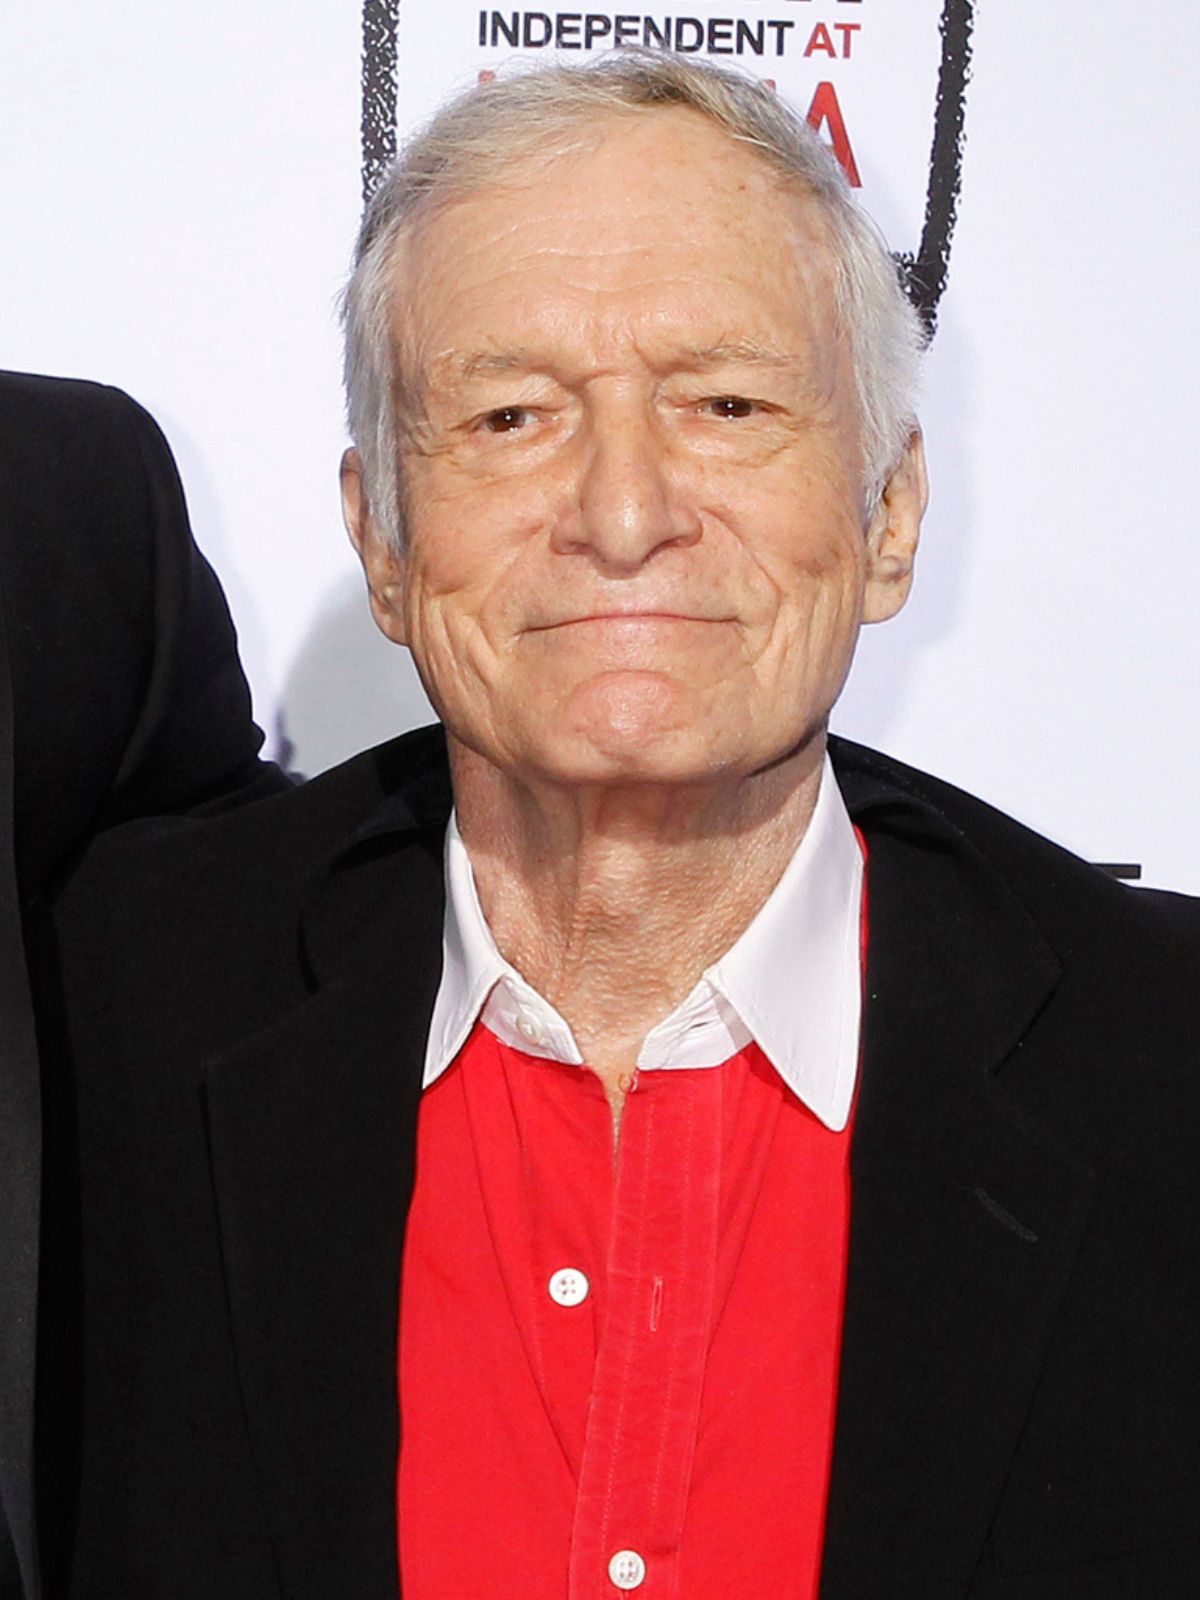 Hugh Hefner's legacy continues. Where are the Playboy founder's ...